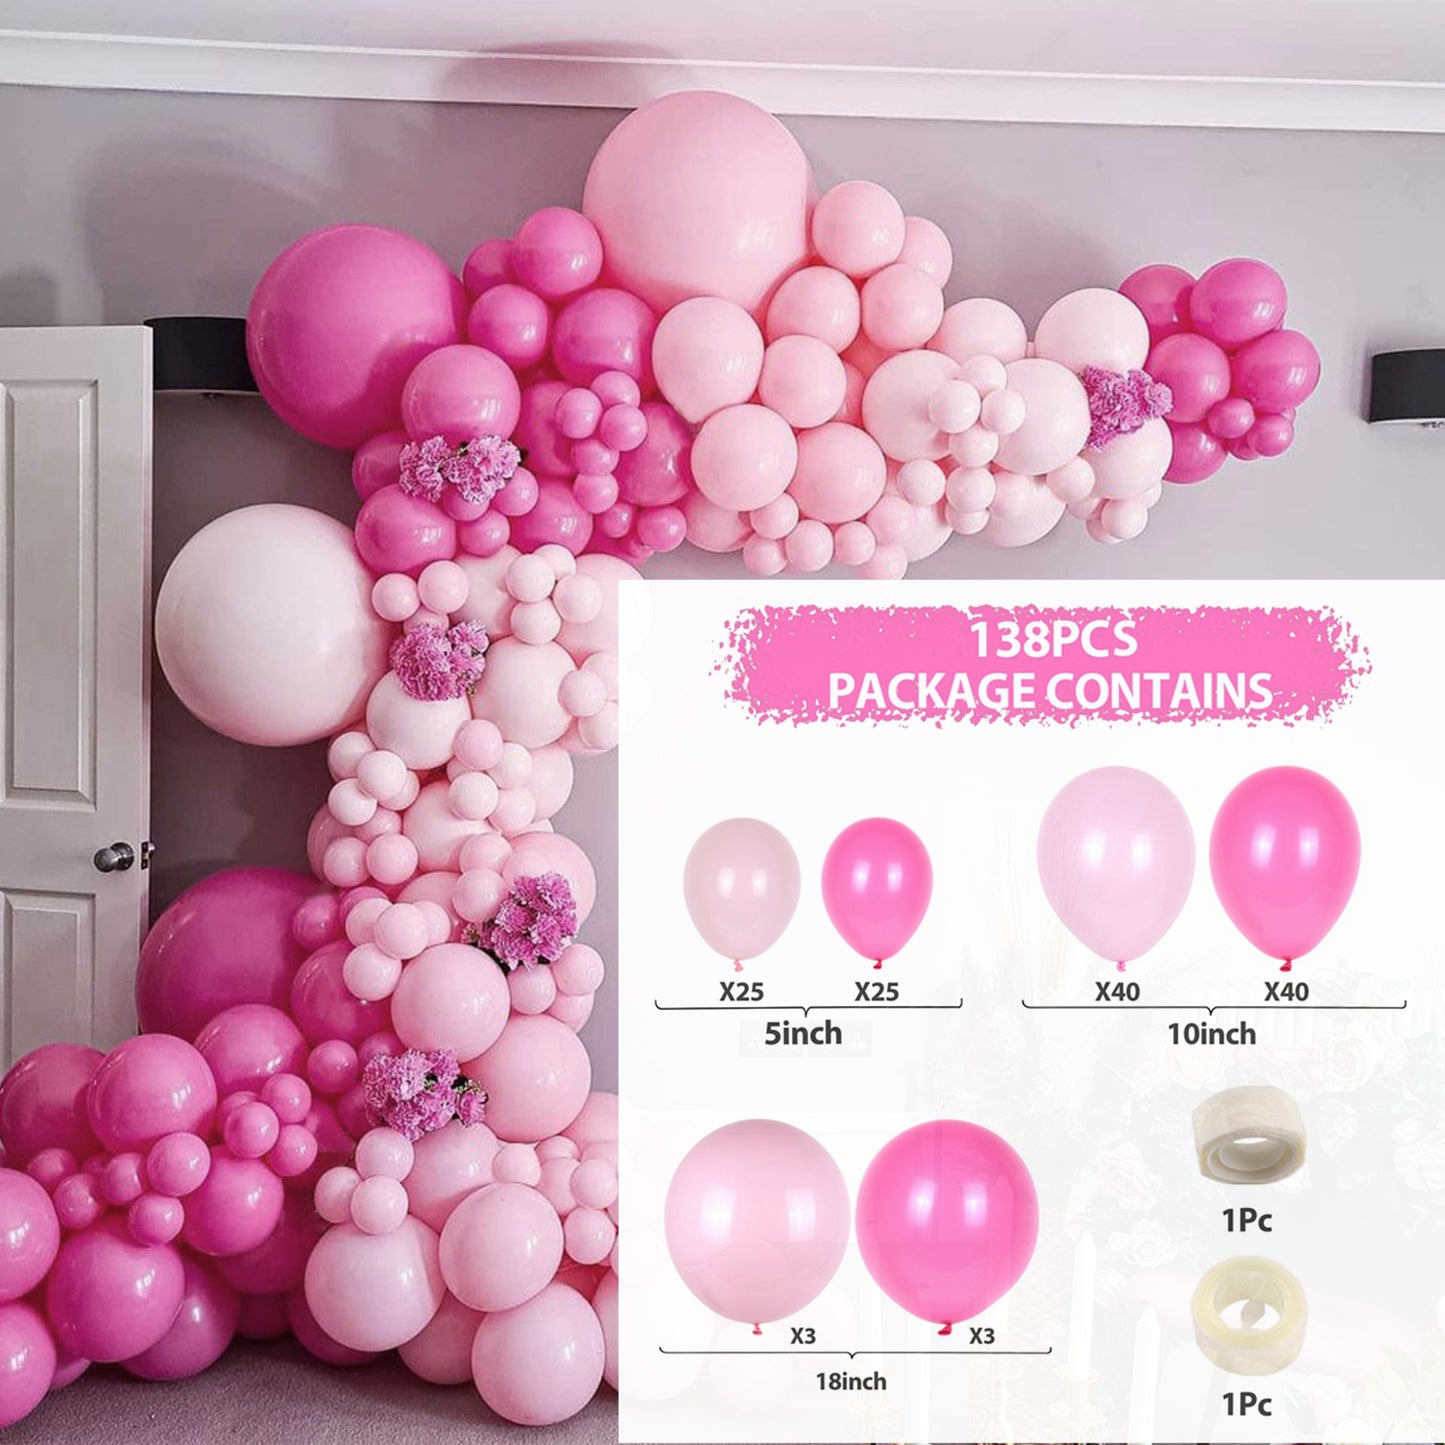 Pink Balloon Garland Arch Kit Birthday Party Decorations Kids Birthday Foil White Gold Balloon Wedding Decor Baby Shower Globos Balloons Set for Birthday Parties DailyAlertDeals 19 AS SHOWN 